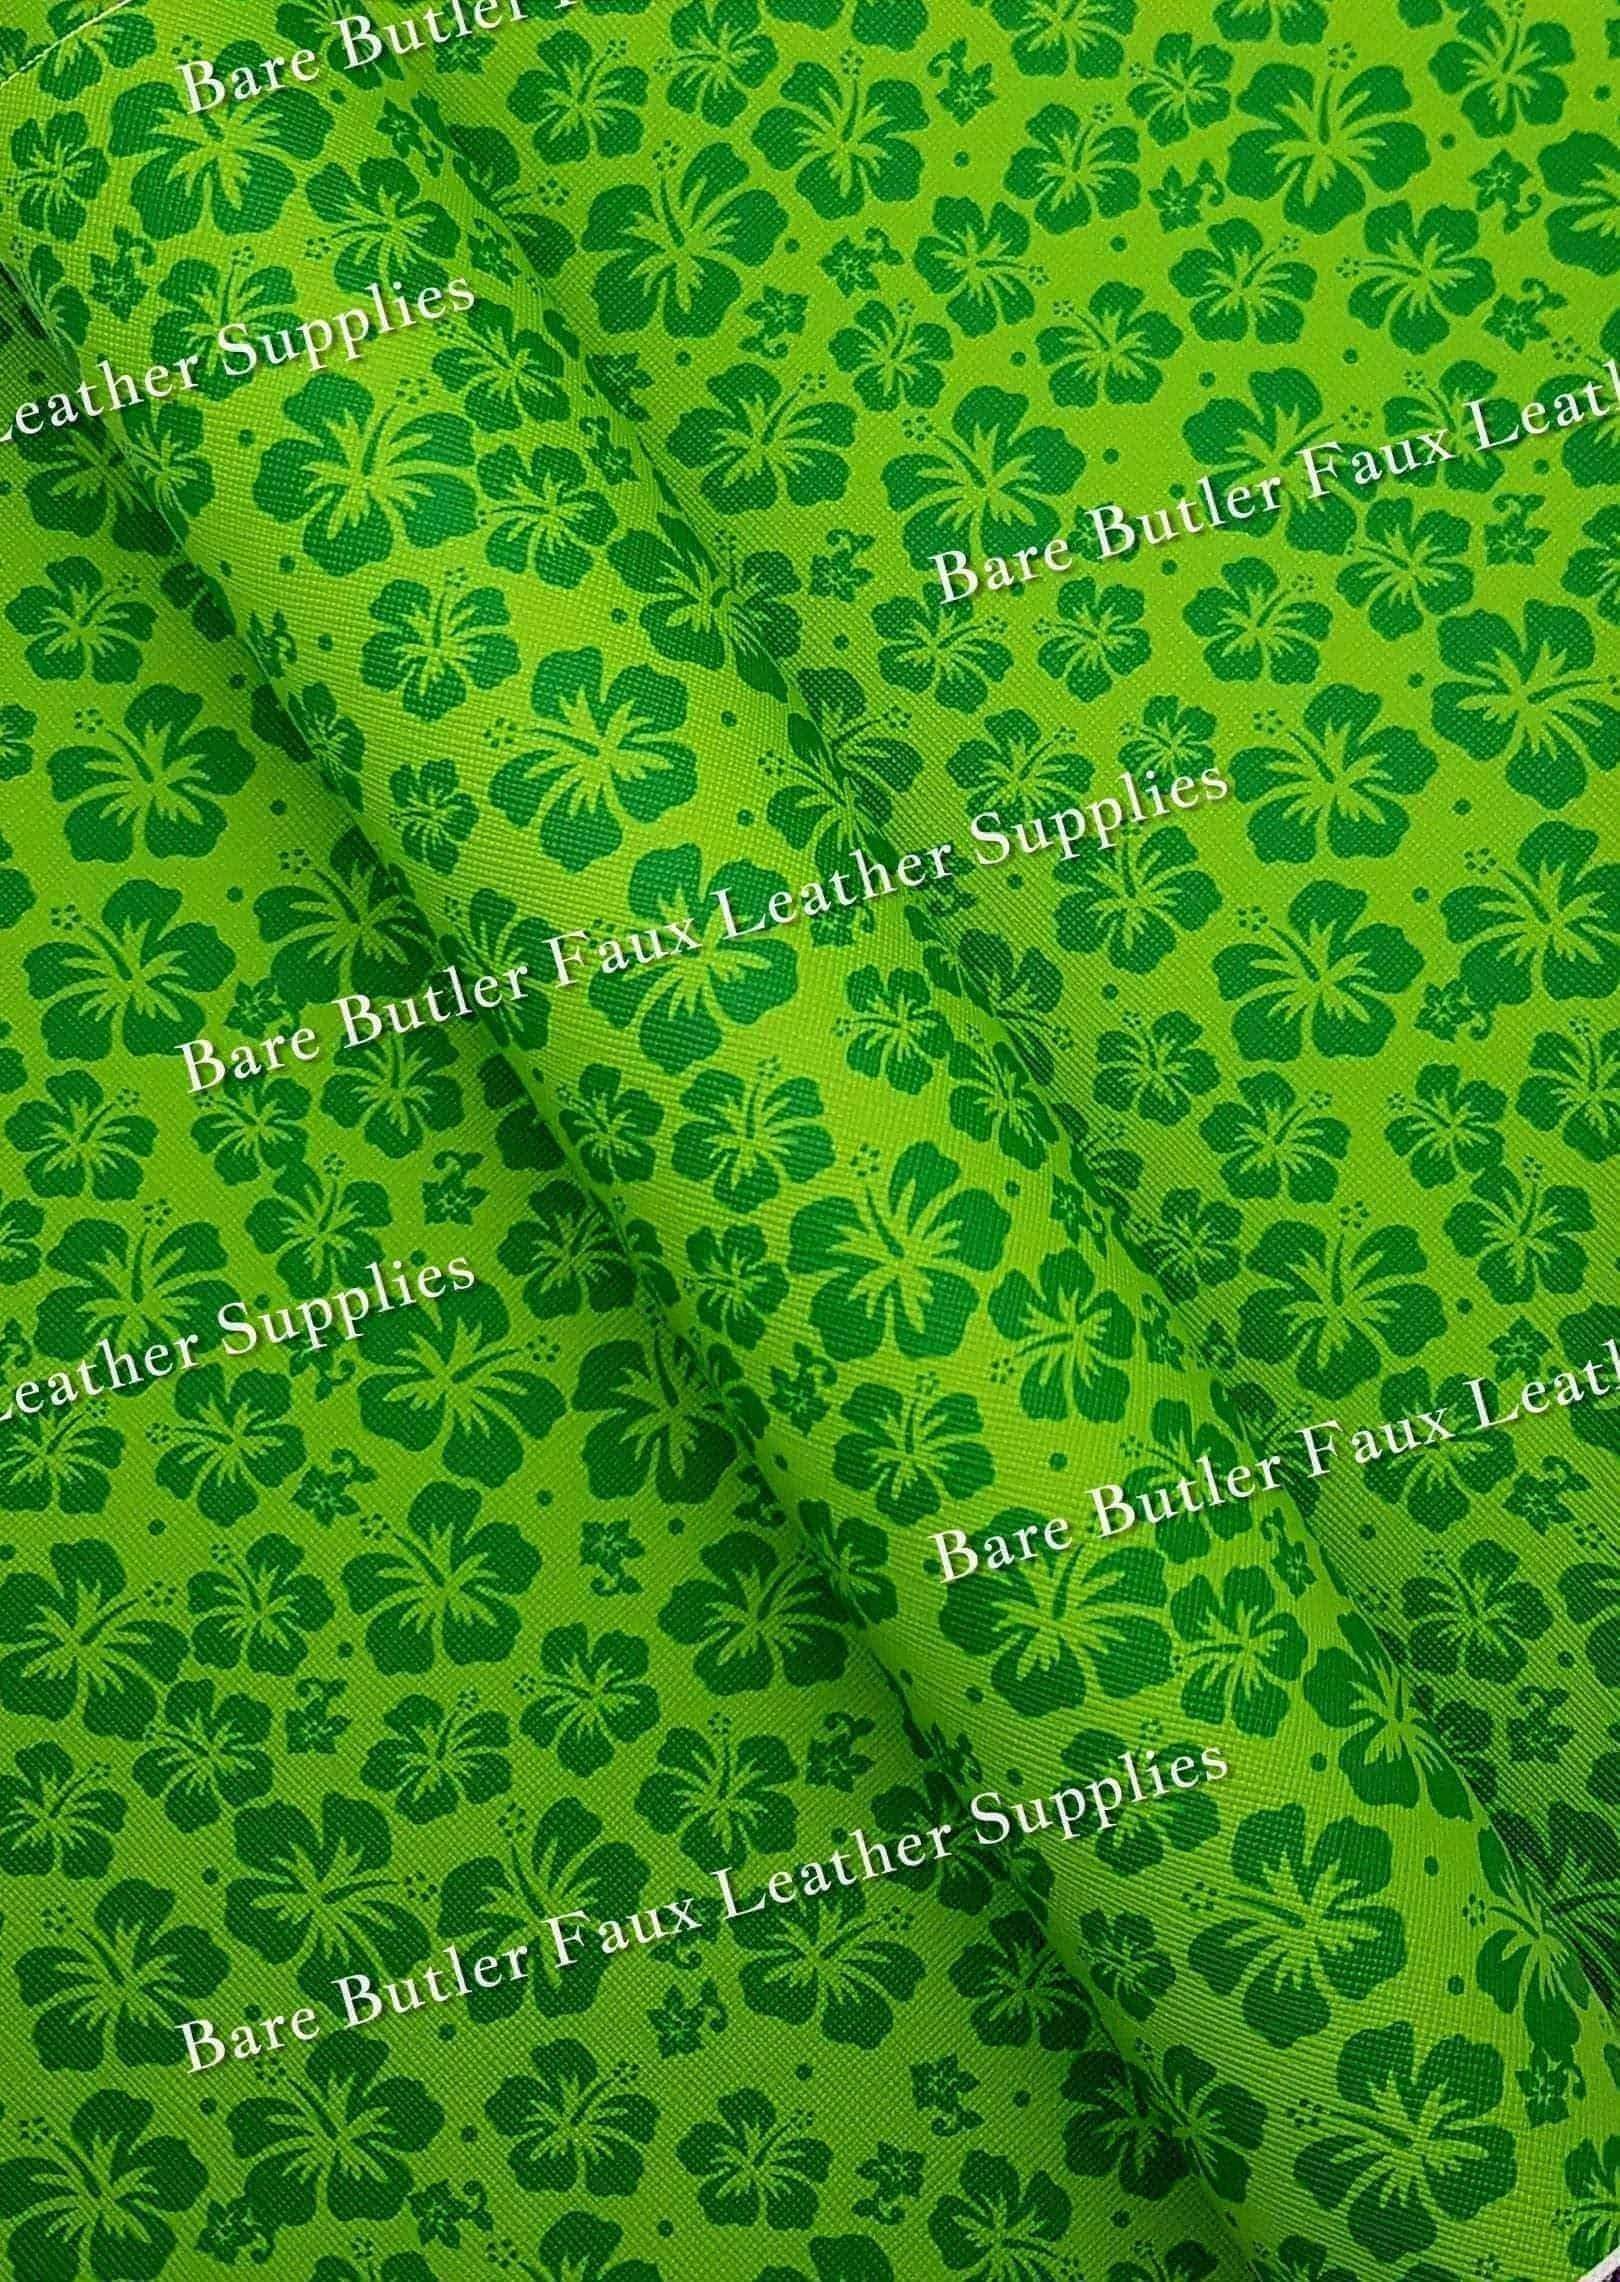 Hibiscus Flower Green - Faux, Faux Leather, floral, flower, flowert, hearts, hibiscus, Leather, leatherette, pattern, tropical - Bare Butler Faux Leather Supplies 